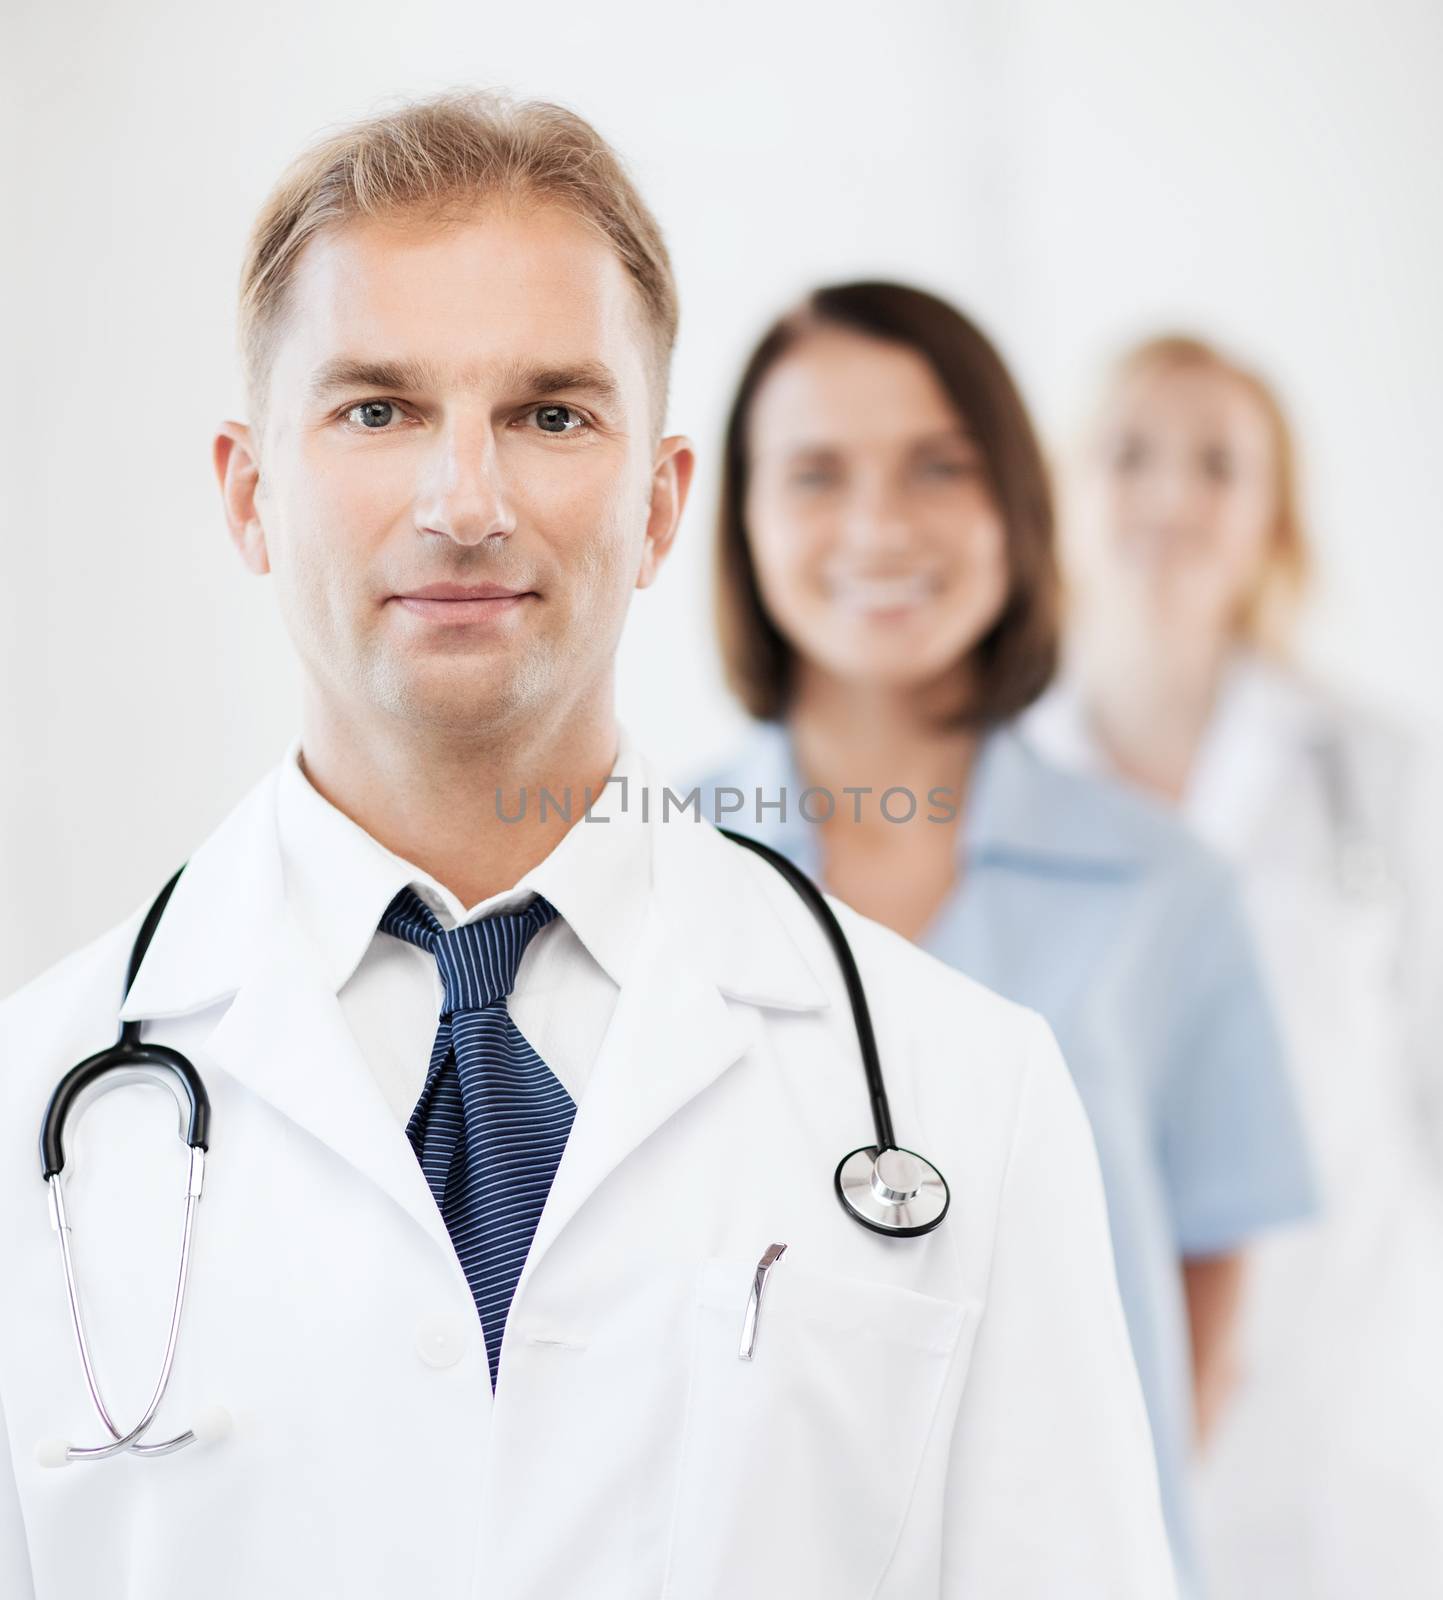 doctor with stethoscope and colleagues by dolgachov